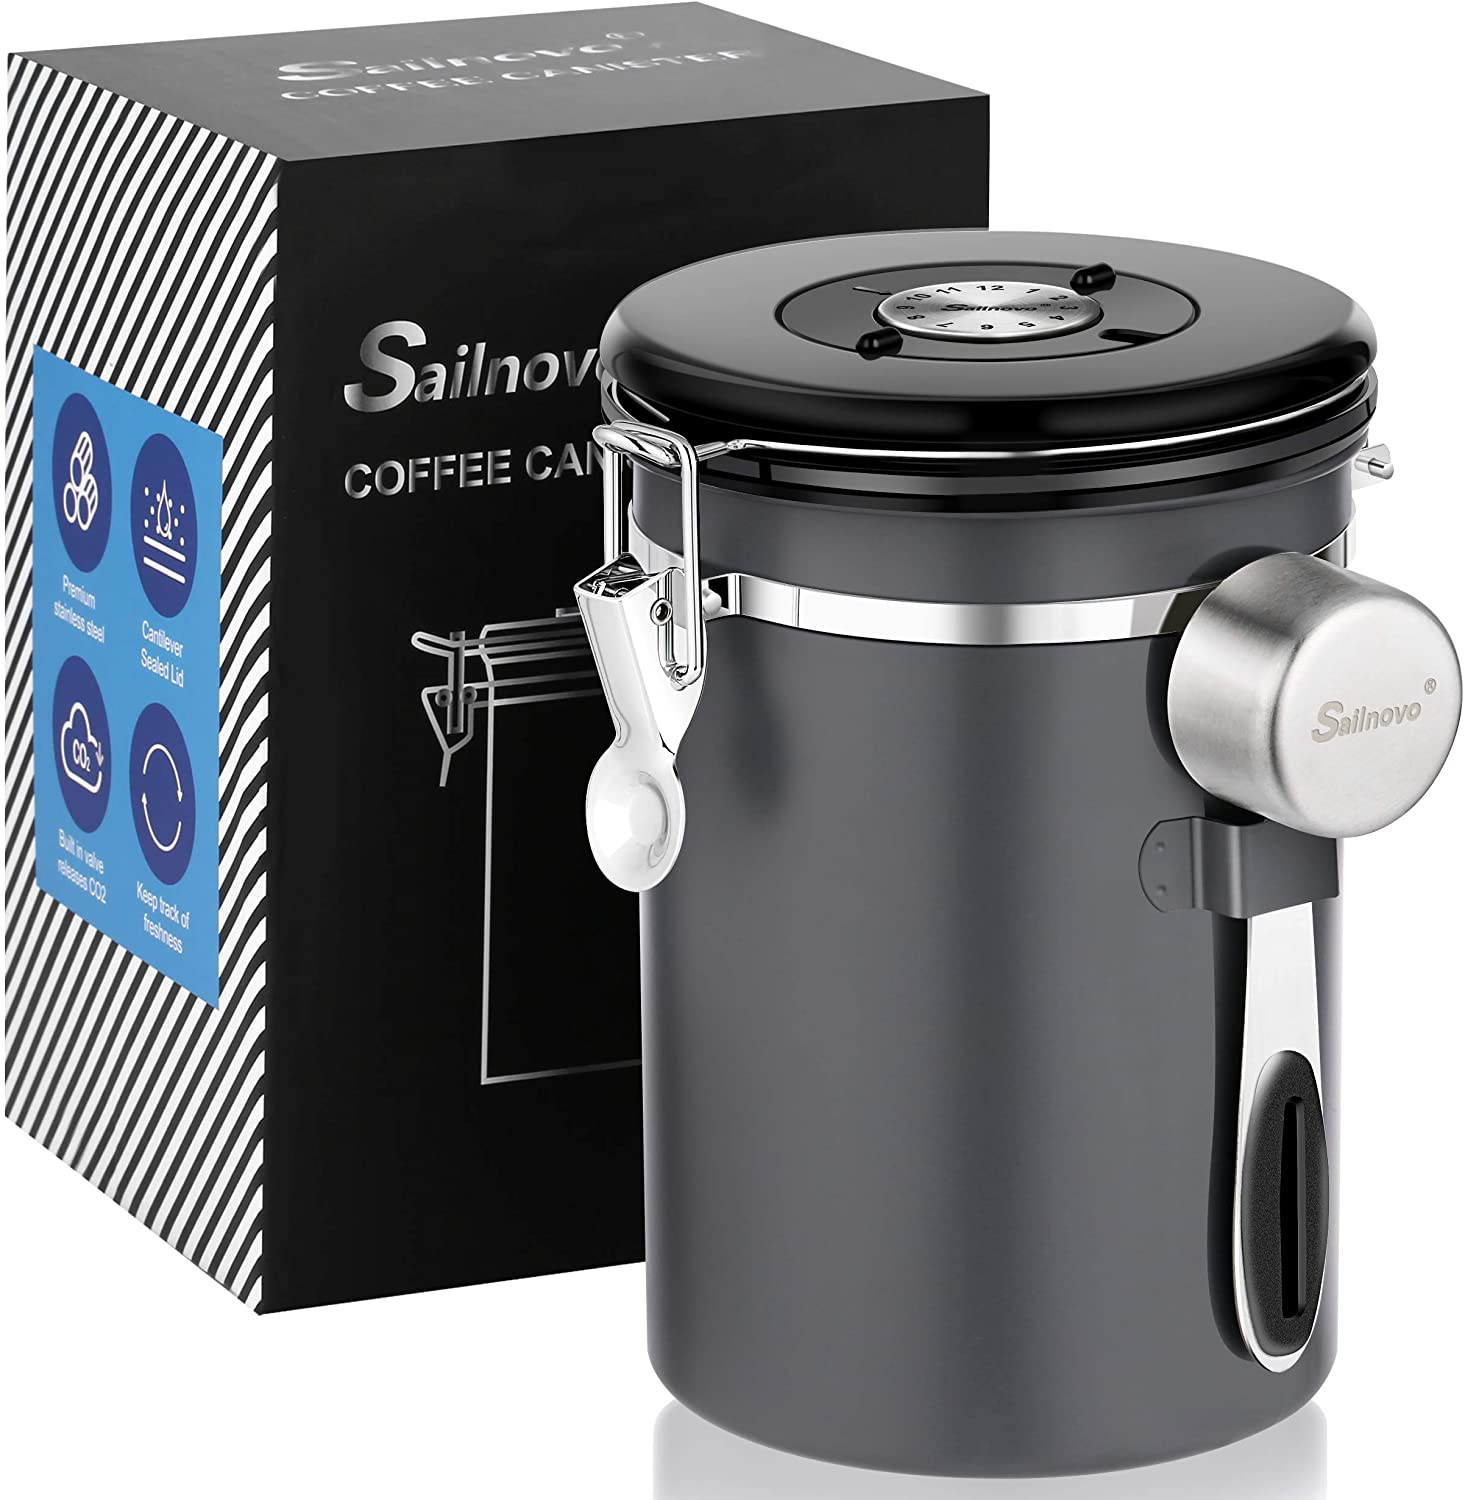 Sailnovo Stainless Steel Coffee Canister